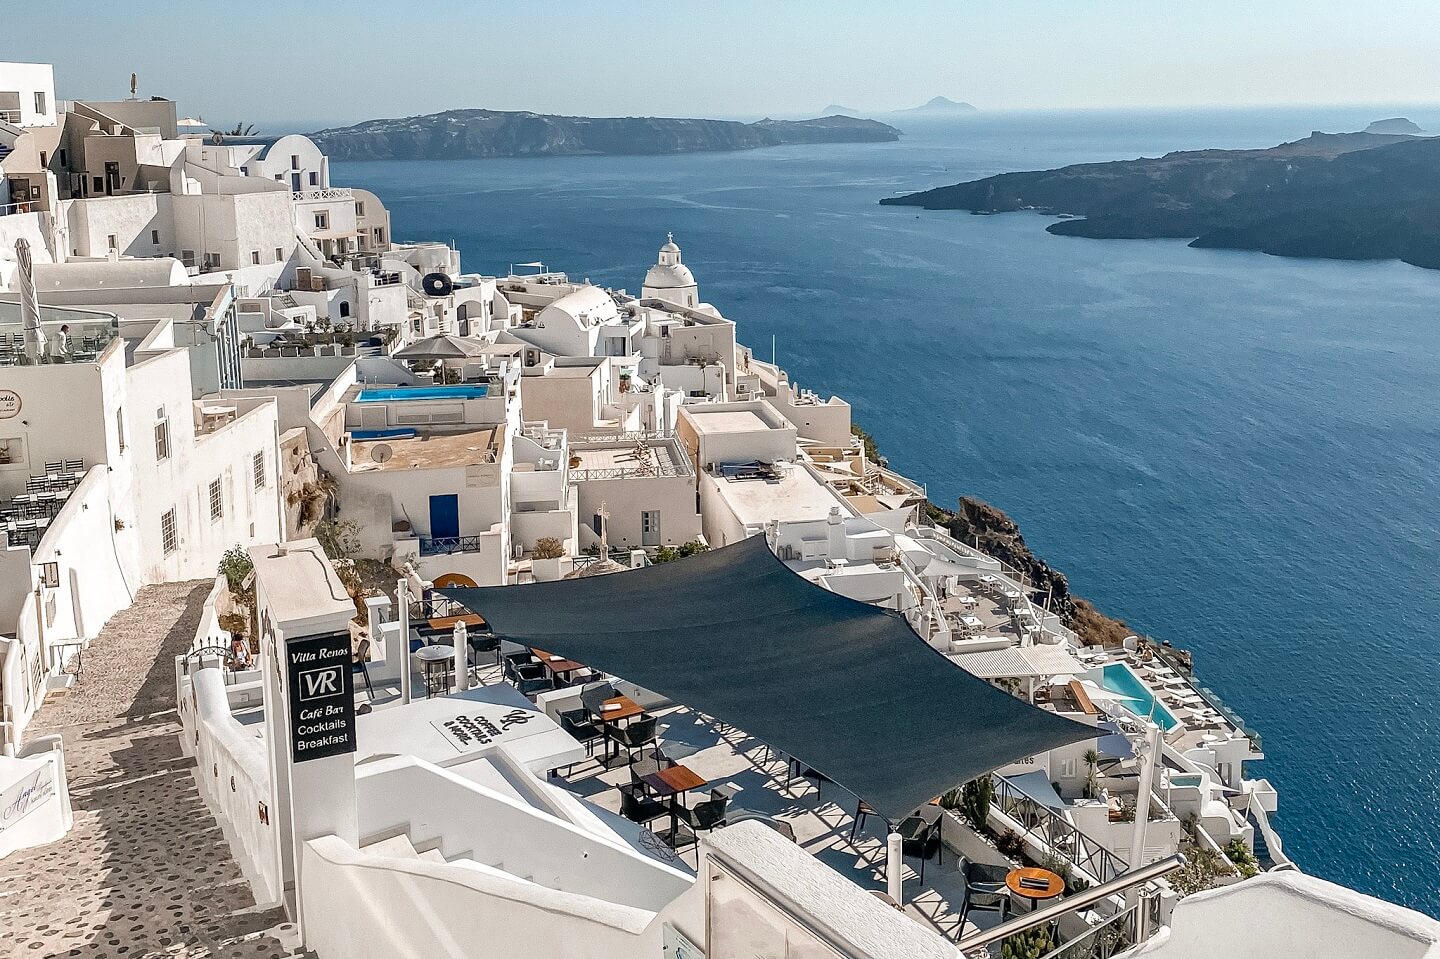 Picture perfect of Santorini alleys